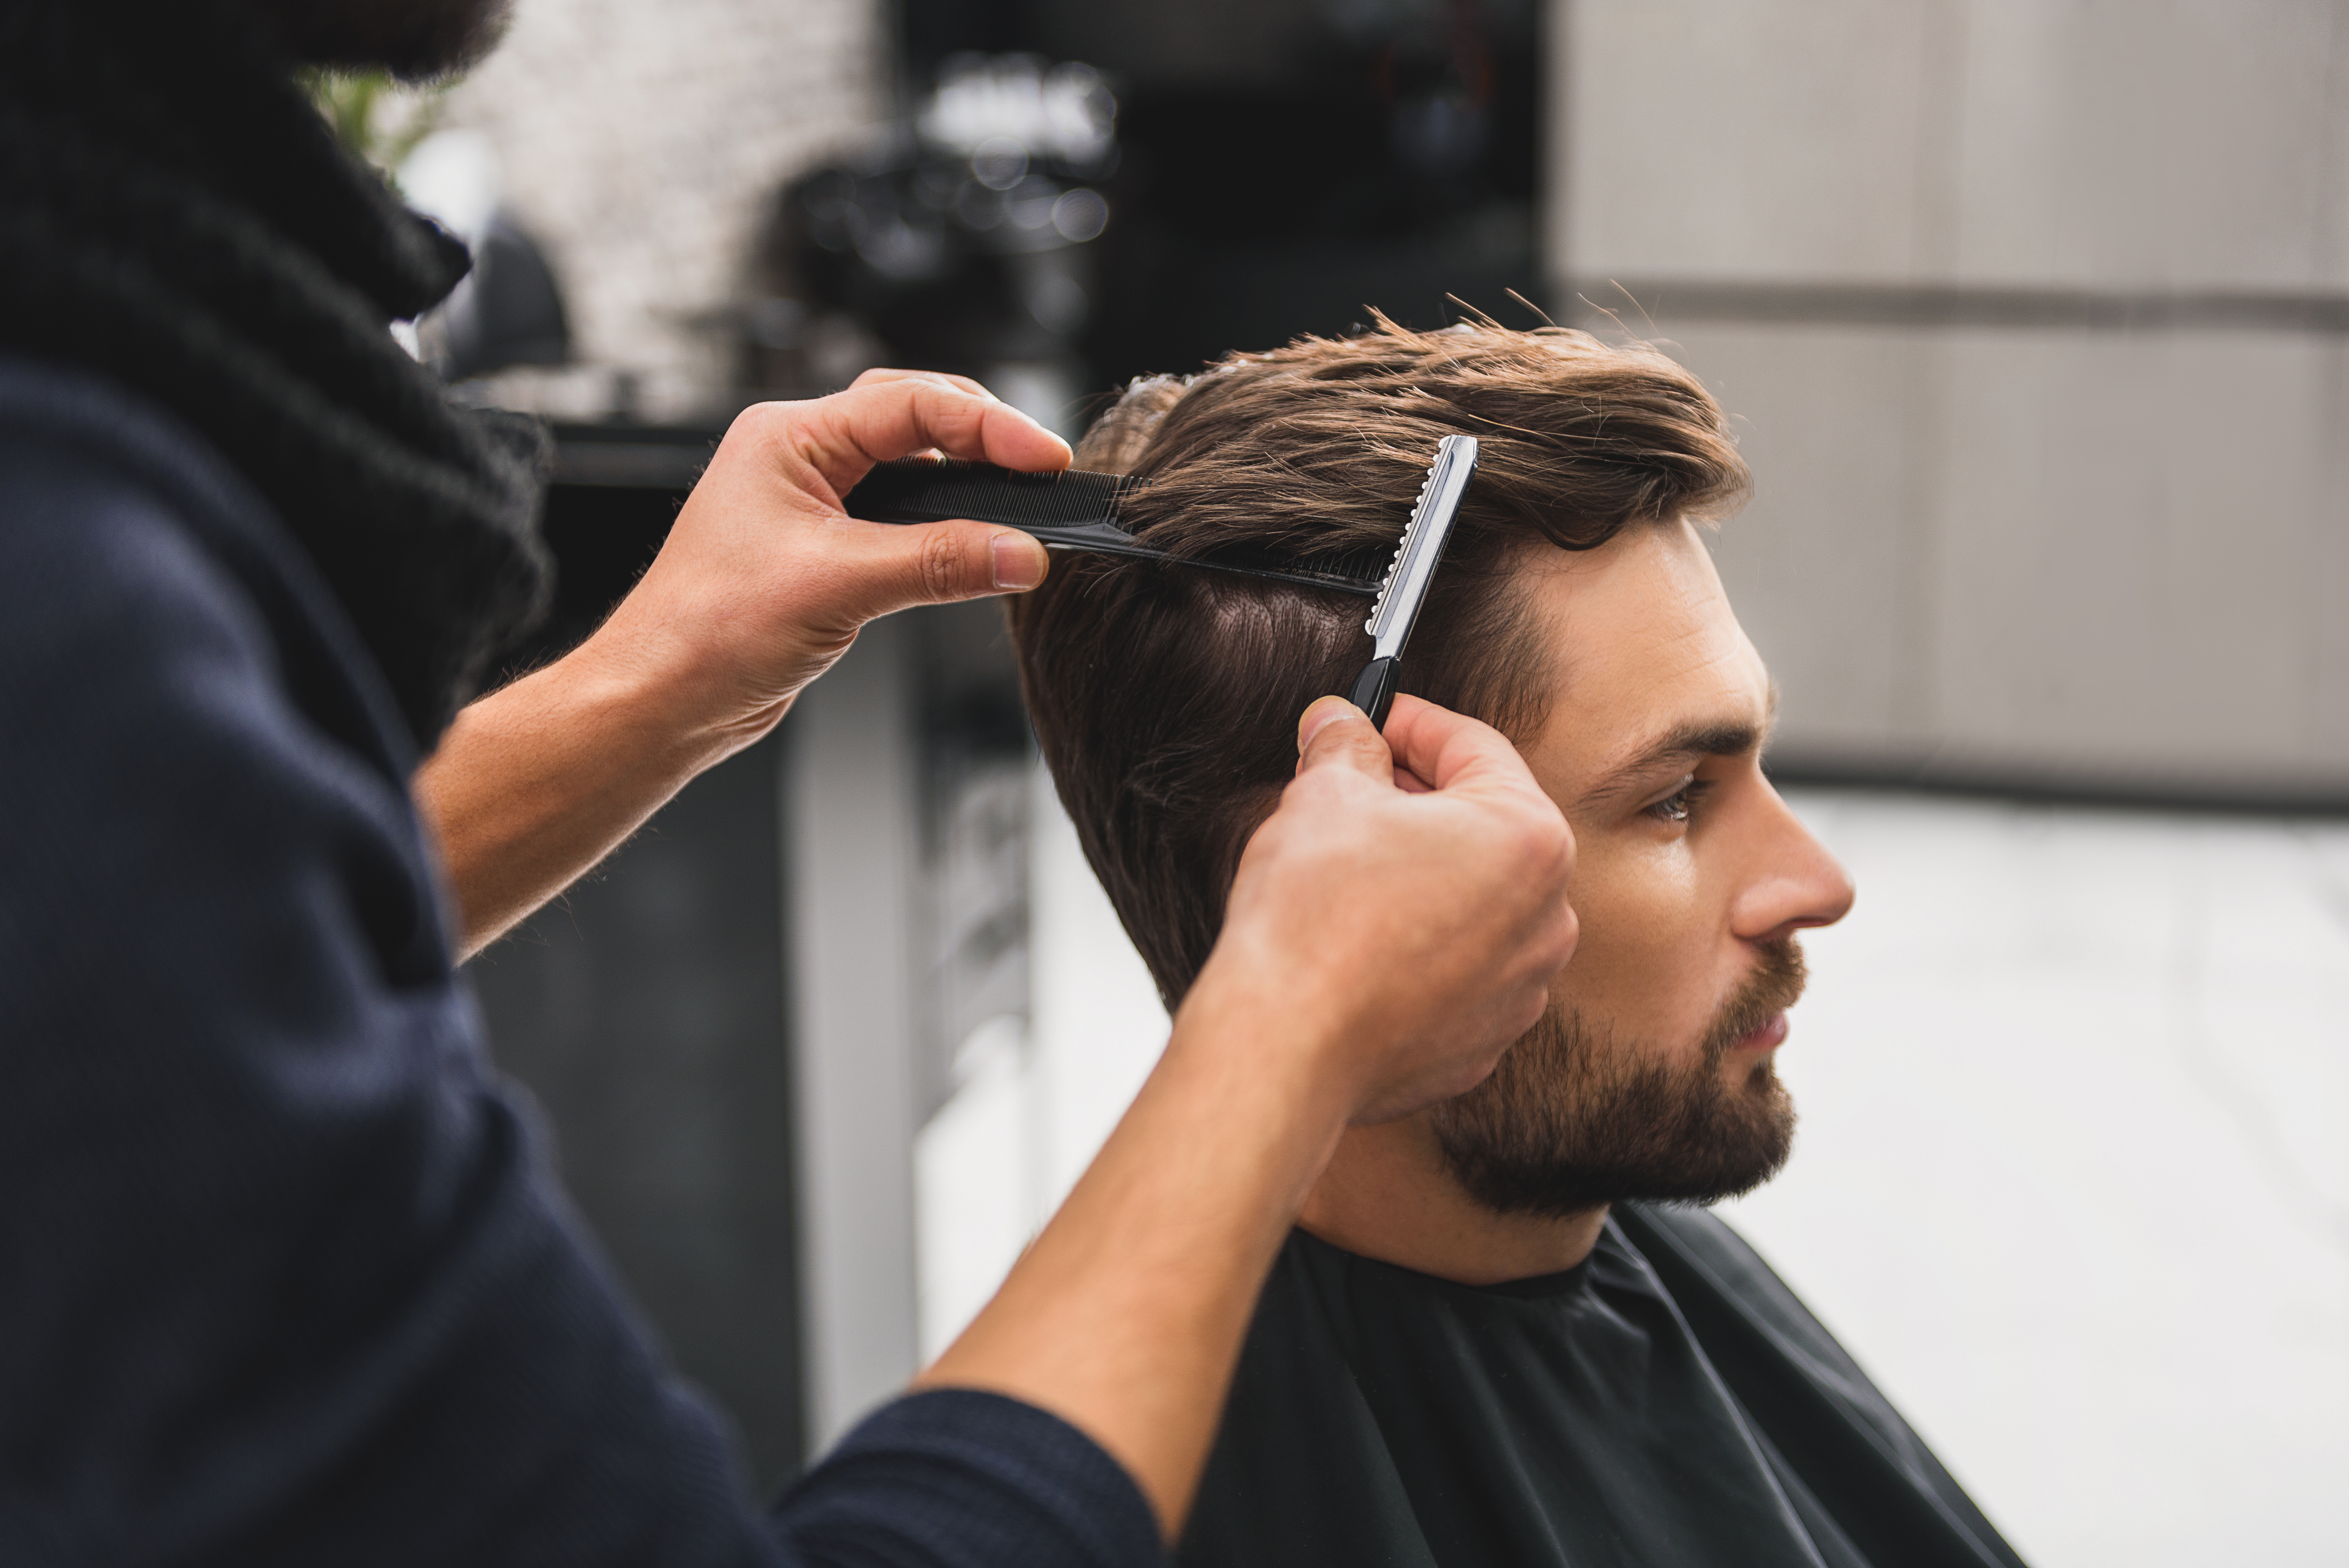 Men's Grooming Salon | Mens Grooming Services - Bubbles India